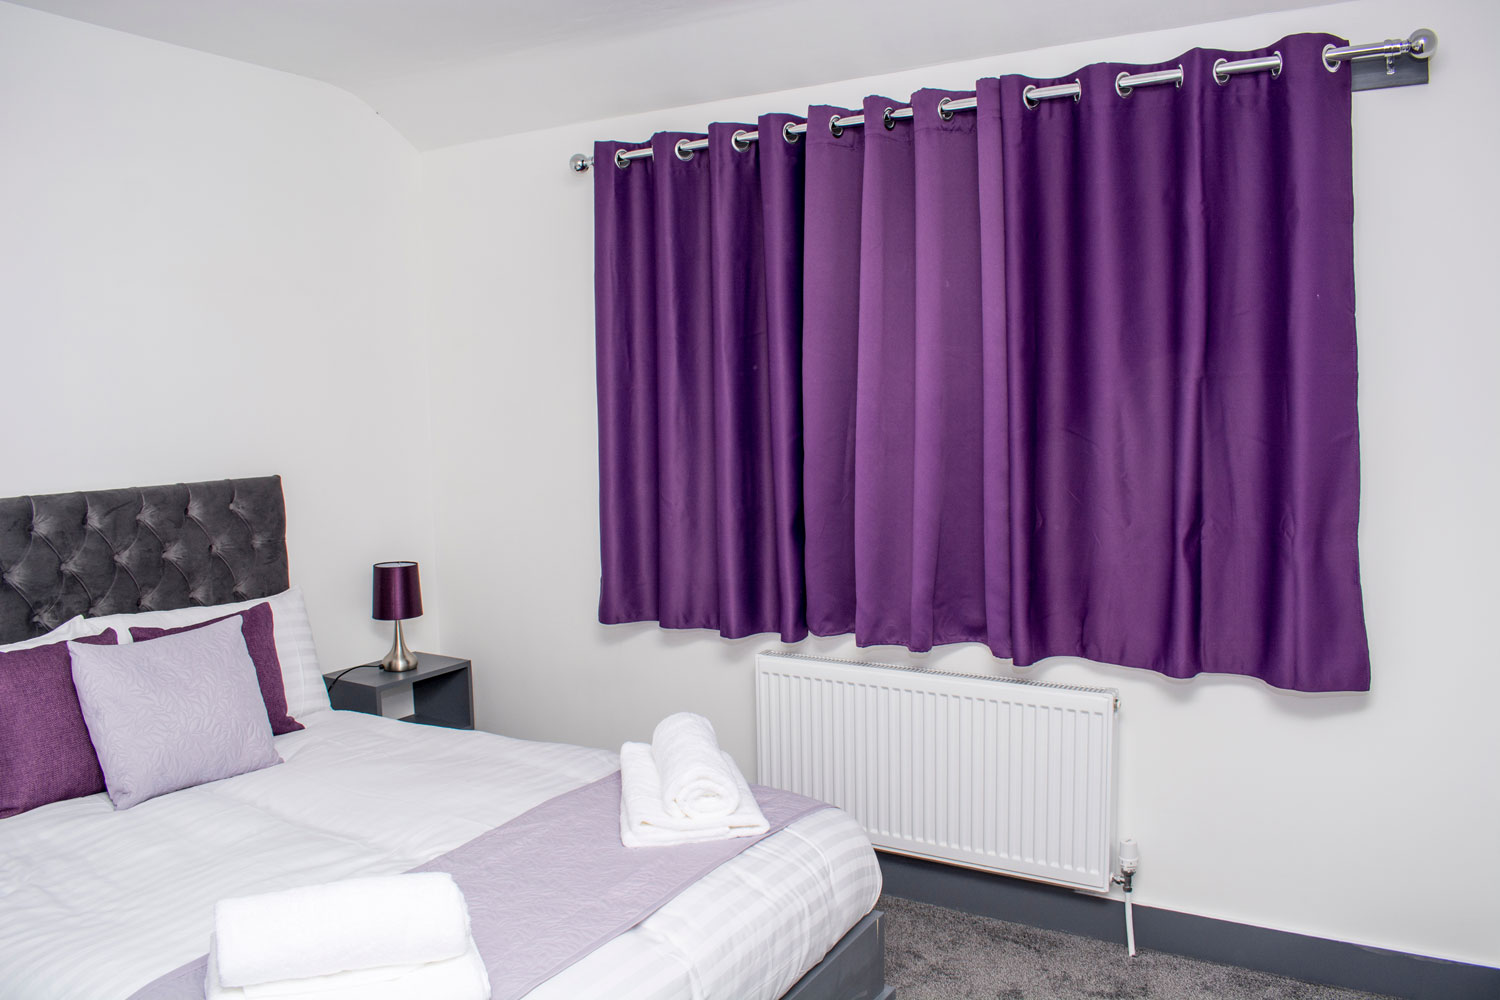 A thick violet colored curtain